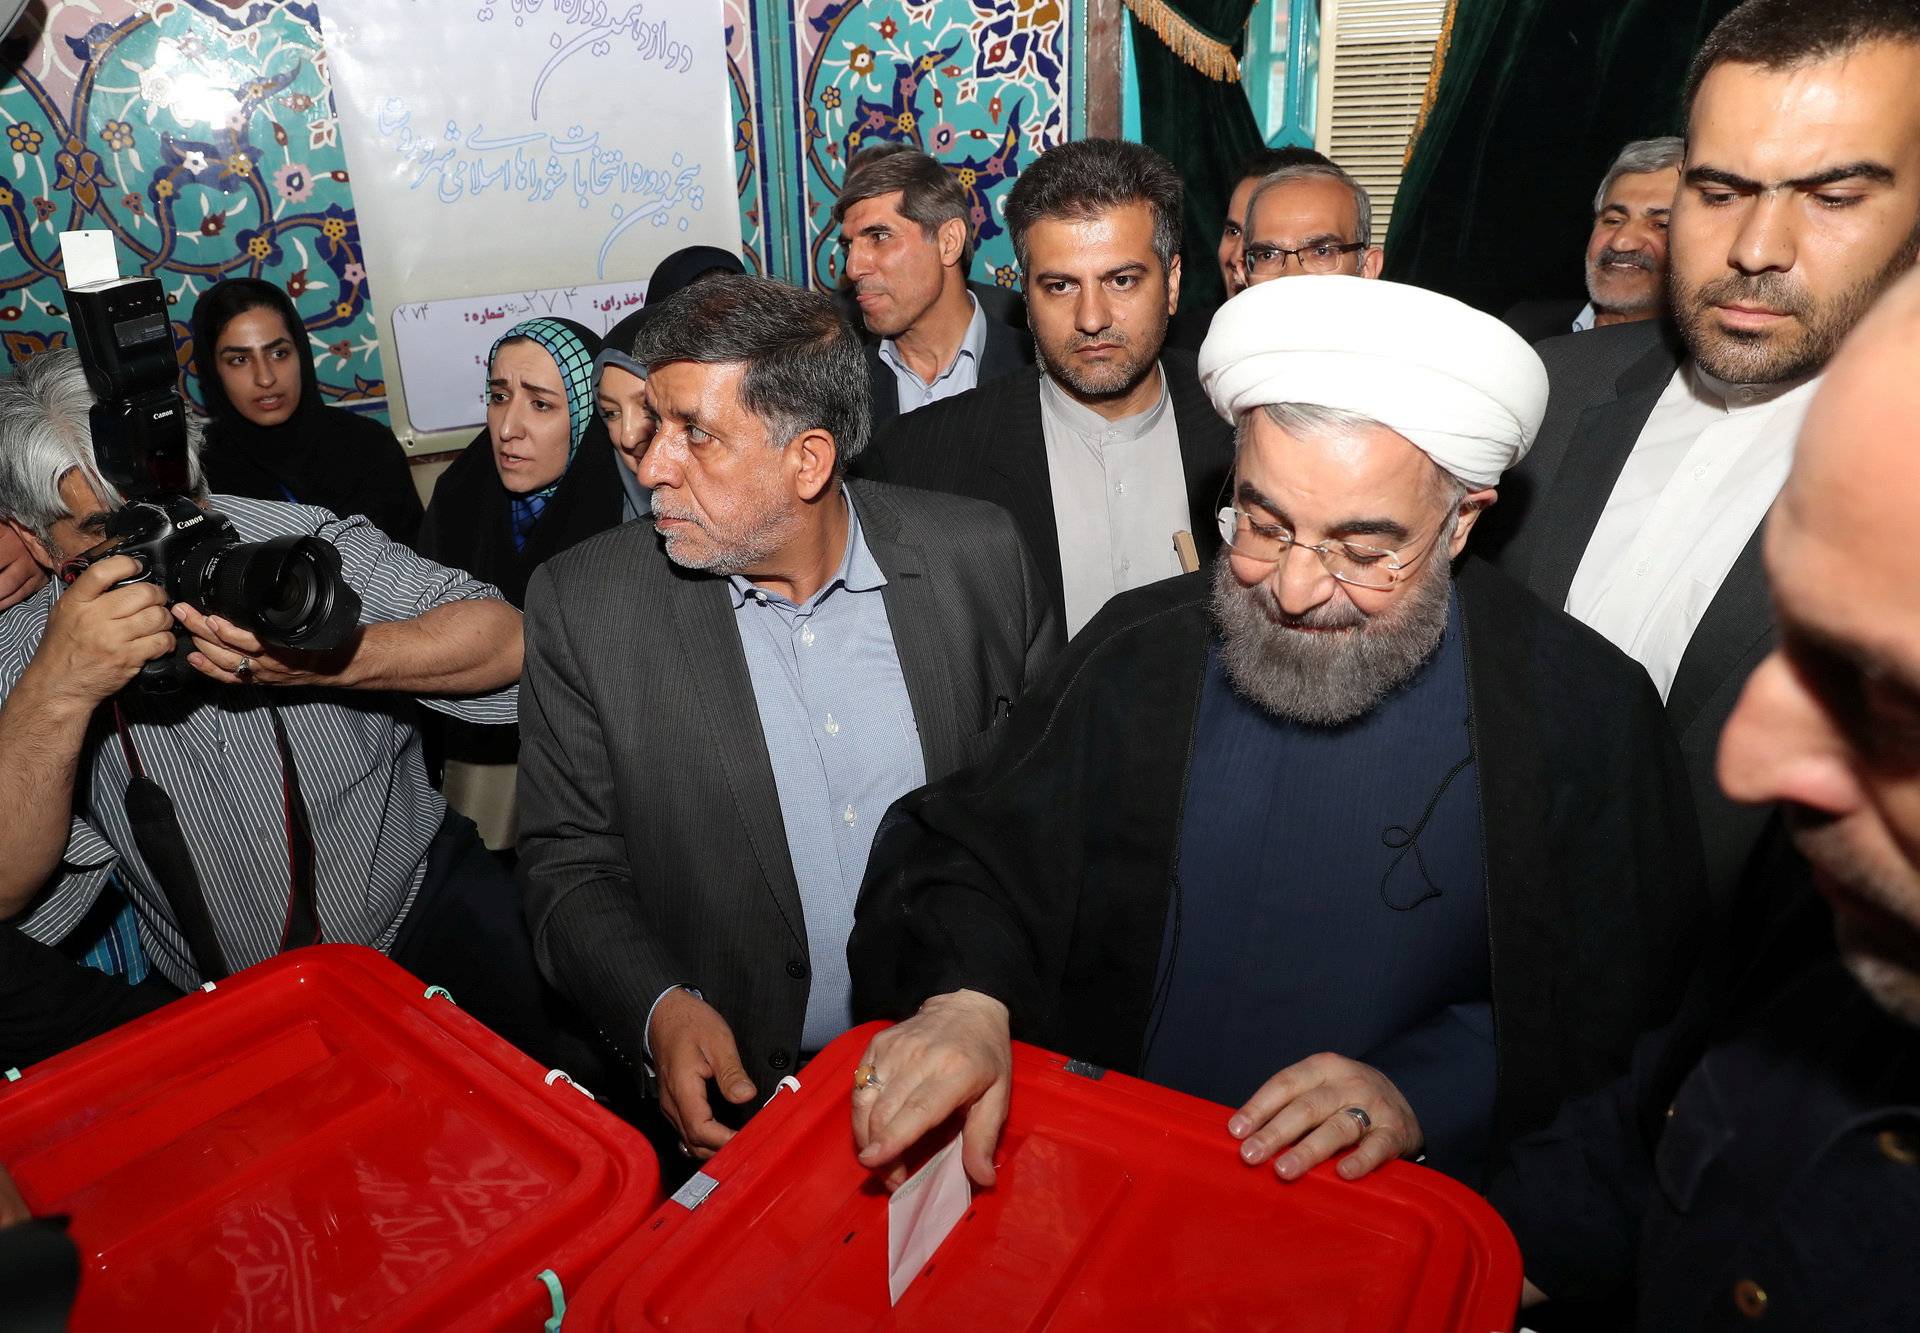 Iran's President Hassan Rouhani casts his ballot during the presidential election in Tehran